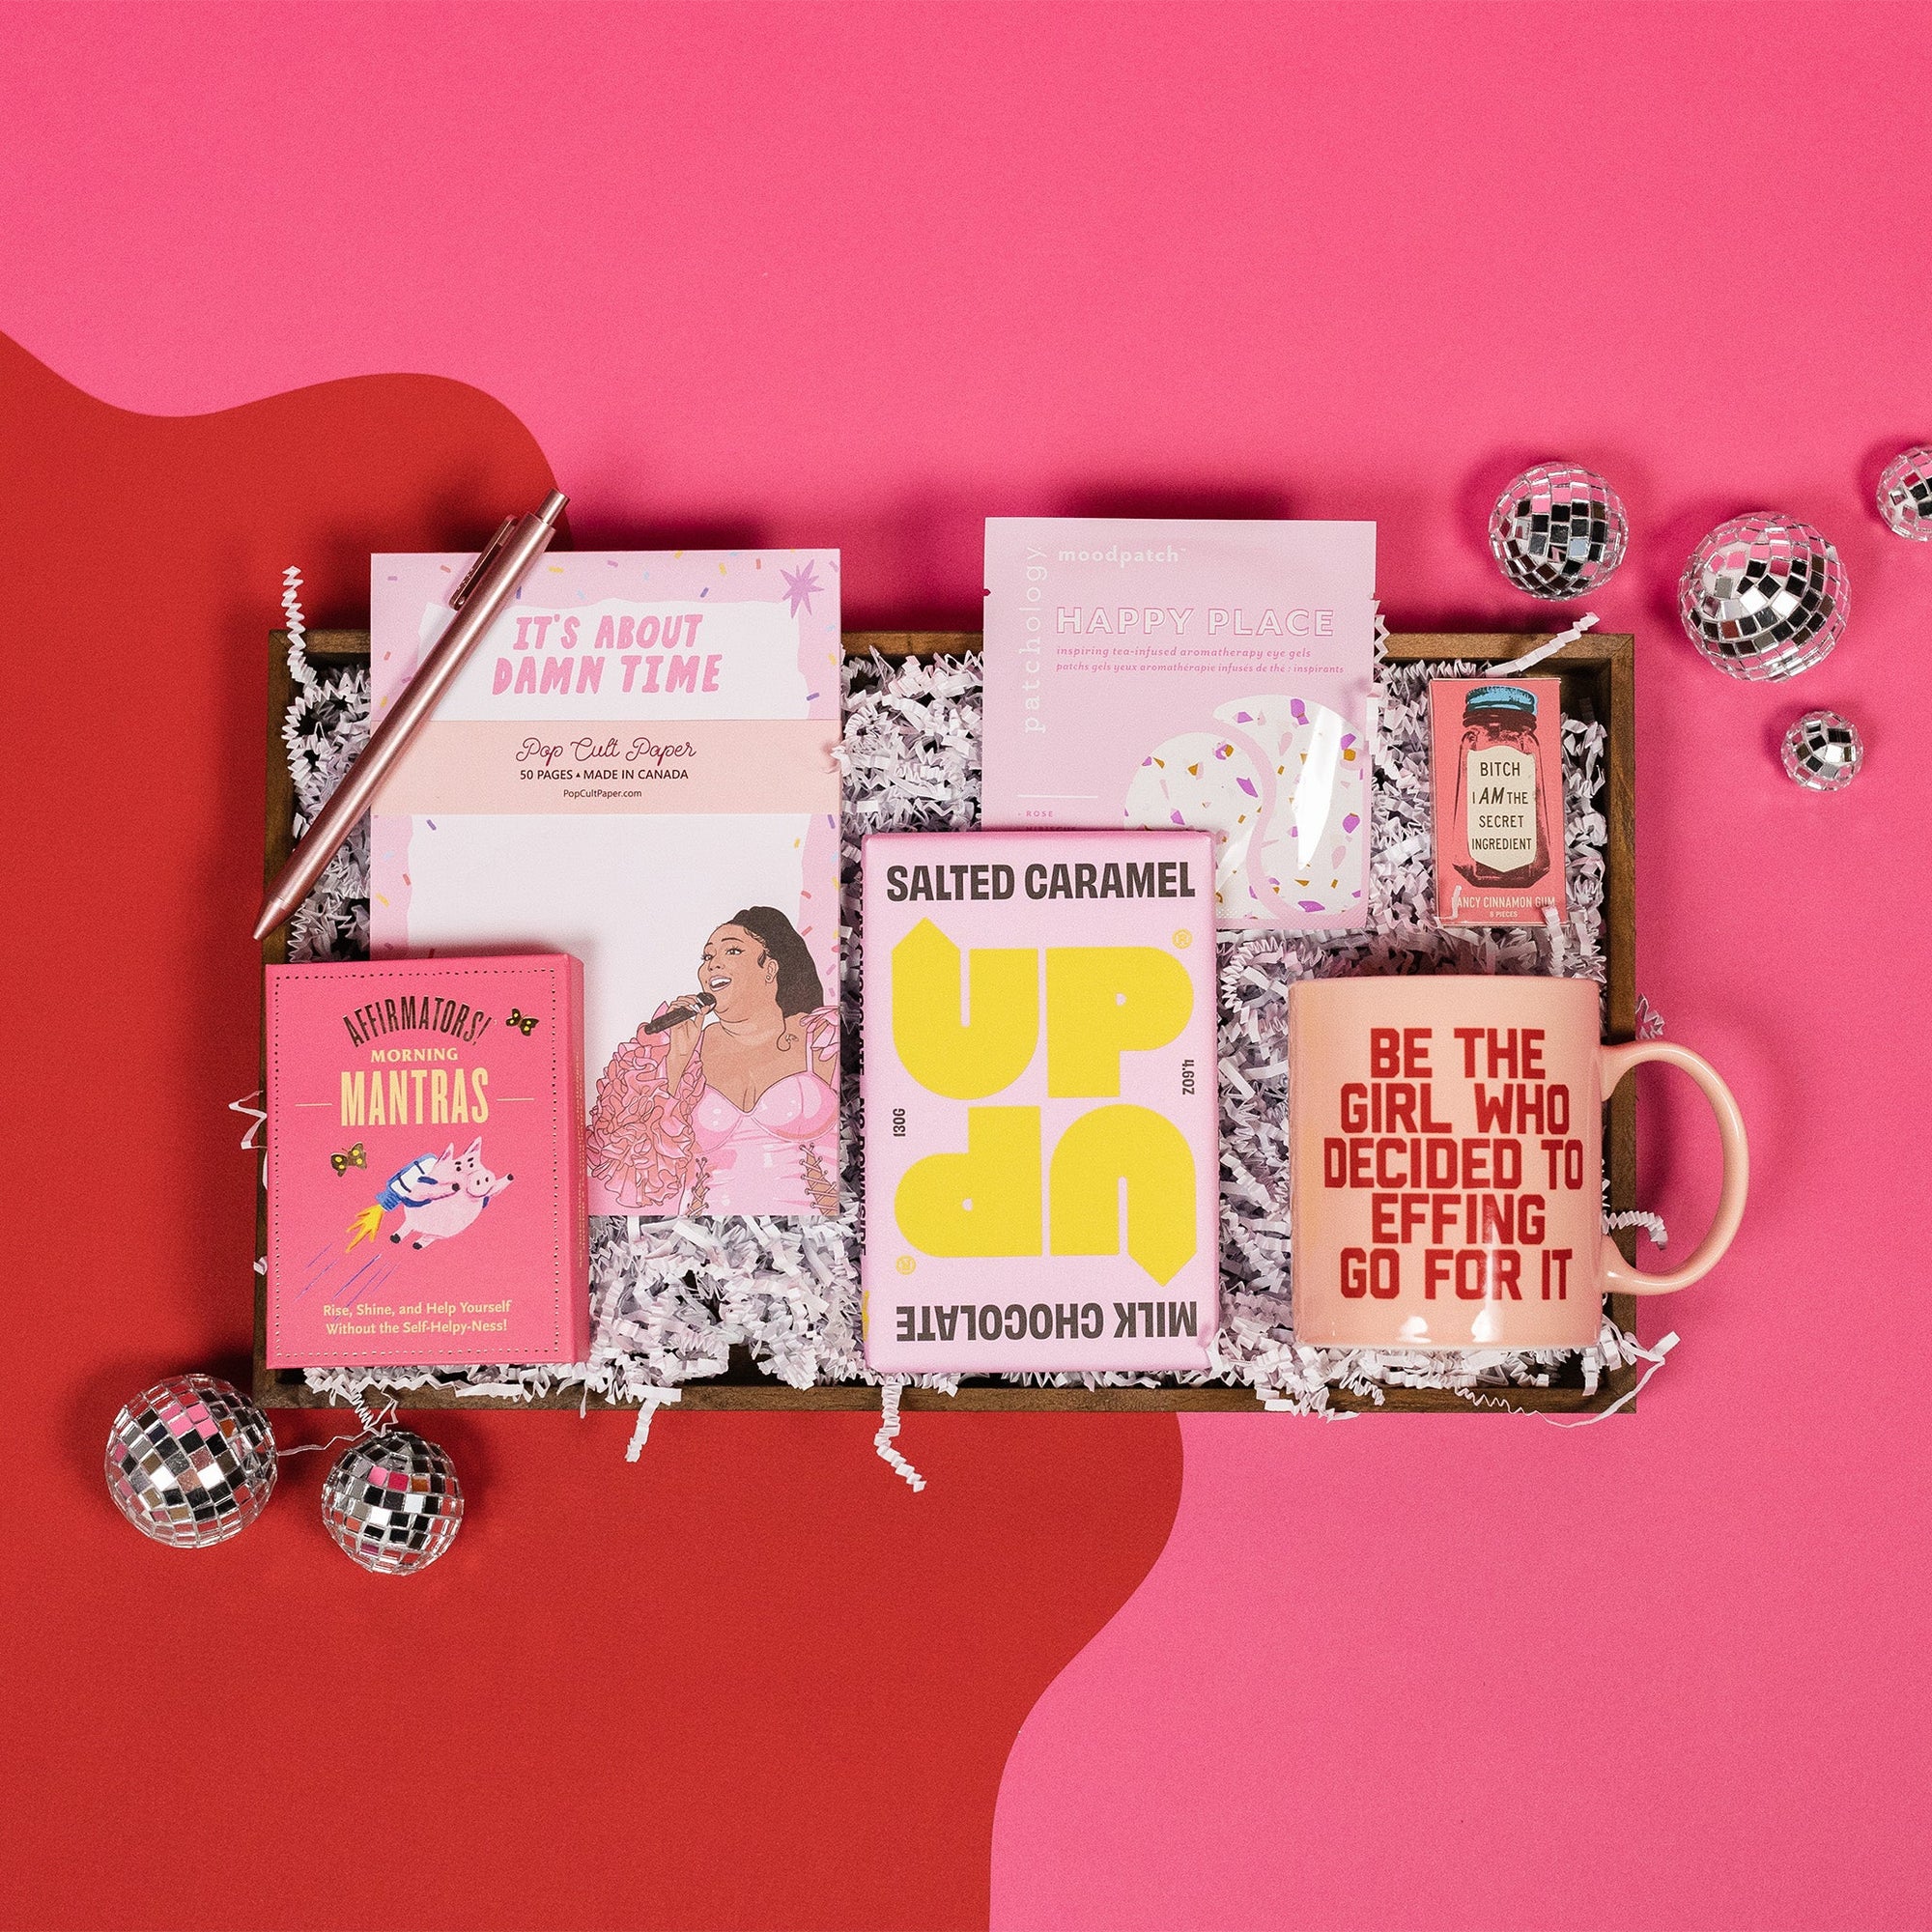 On a bright pink and red background, an assortment of Lizzo items are arranged among white packing crinkle and  mini disco balls. The gifts include a rose gold retractable gel pen, a notepad that says "It's About Damn Time" with an illustration of Lizzo, a bright pink book of morning affirmations, an Up and Up Salted Caramel Milk Chocolate bar, a mug that says "Be the Girl who Decided to Effing Go For It," gum that says, "Bitch I am the Secret Ingredient" and a set of Patchology 'Happy Place' eye masks.